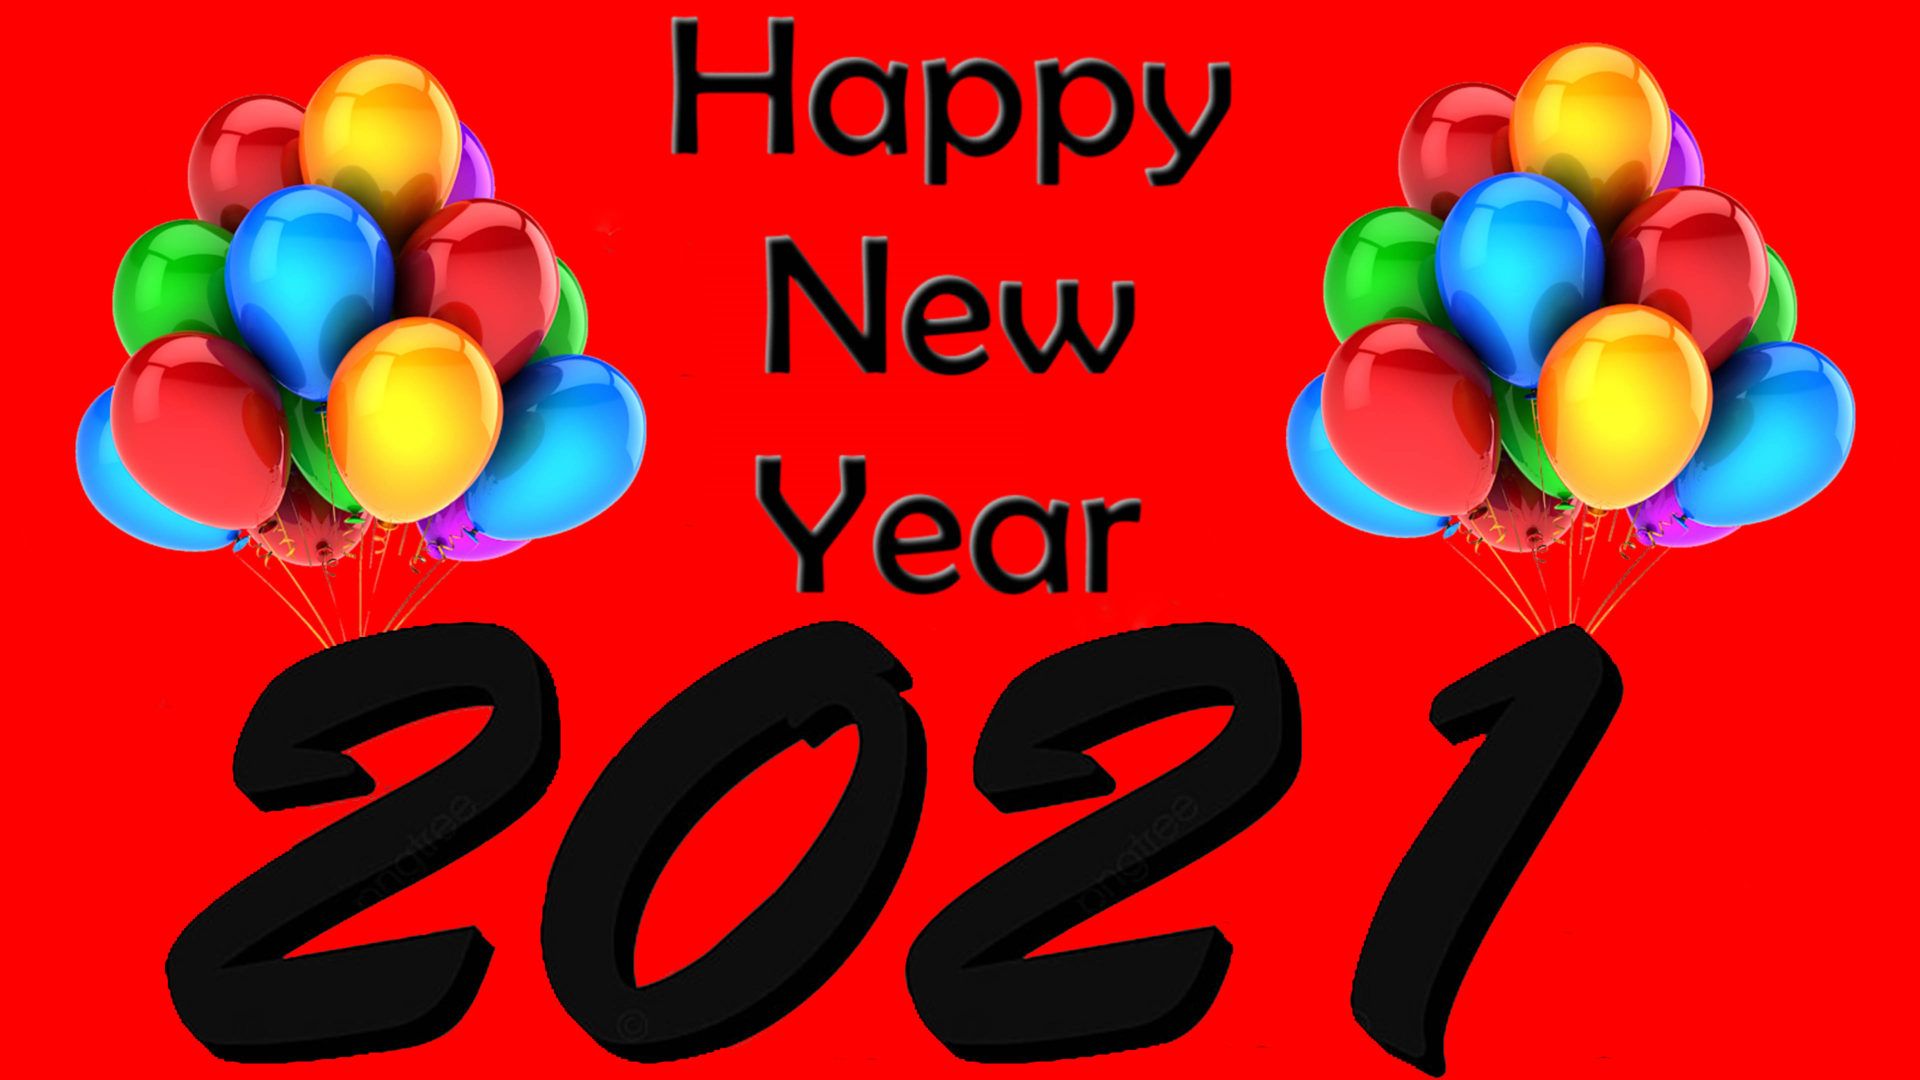 New Year Image Greeting Card Happy New 2021 Year Wishes & Quotes 3840x2400, Wallpaper13.com